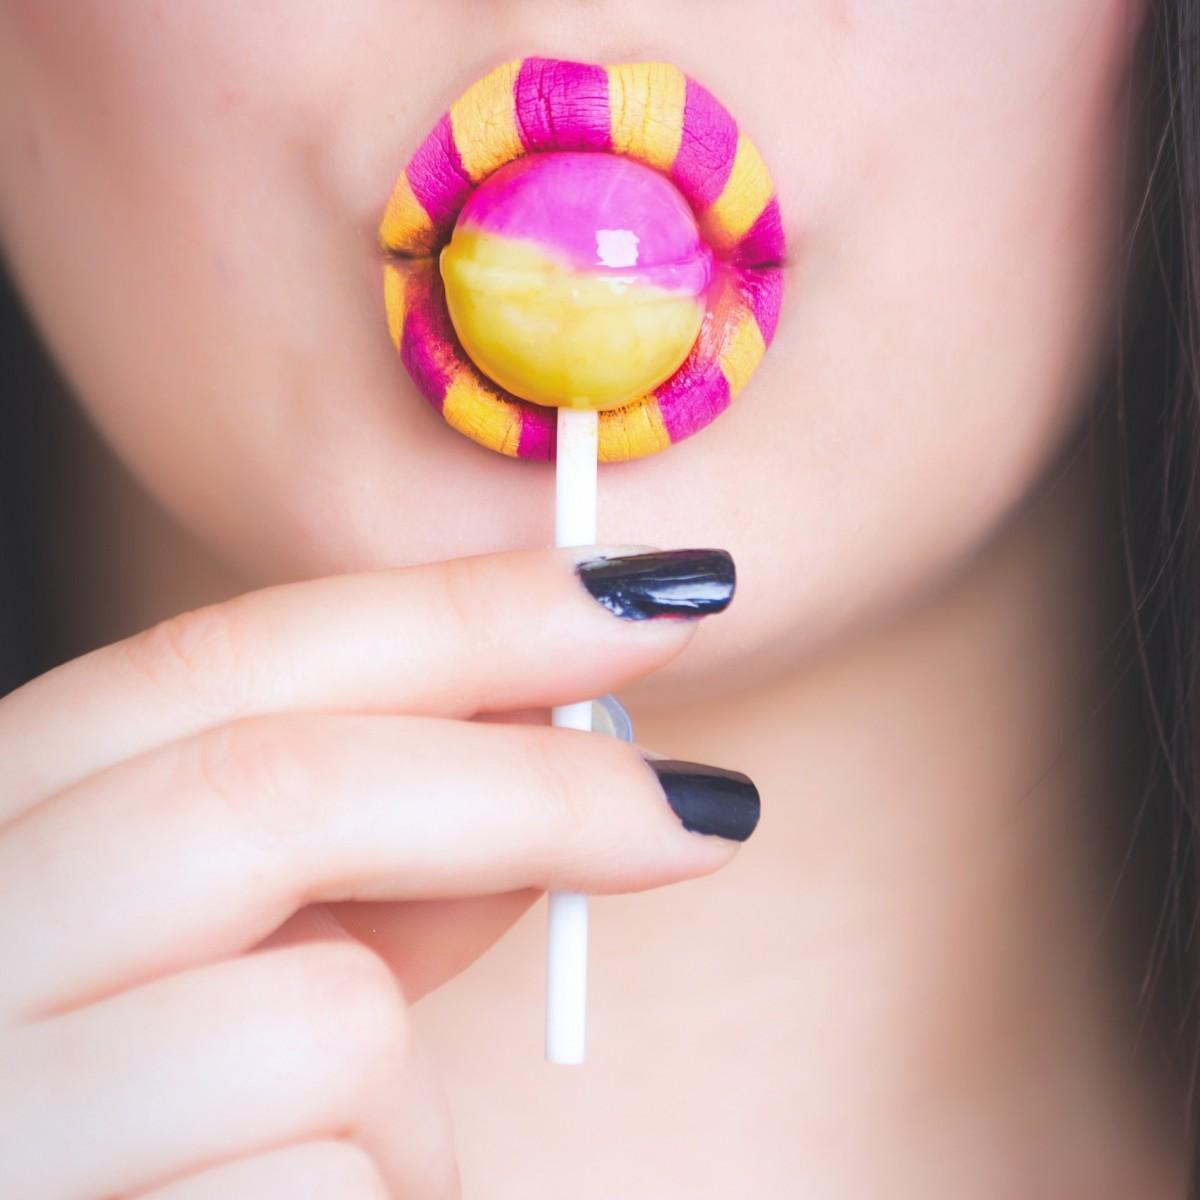 Woman Eating Pink and Yellow Lollipop